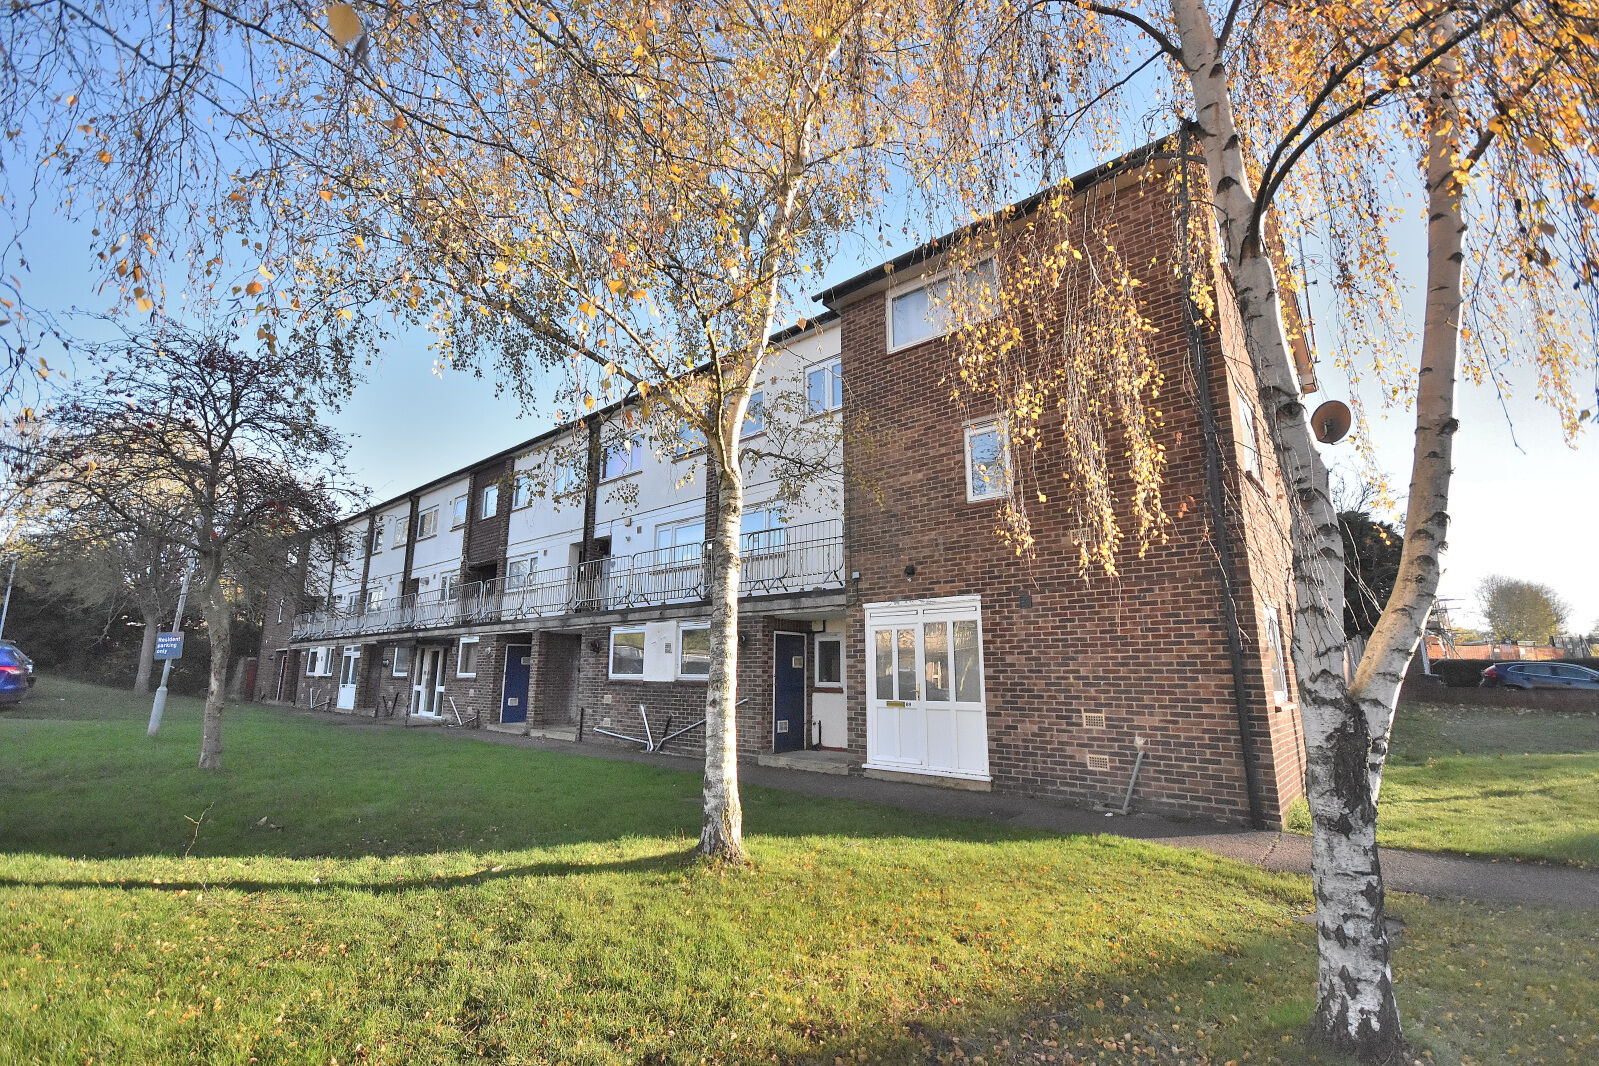 1 bedroom  flat to rent, Available now Plaw Hatch Close, Bishop's Stortford, CM23, main image